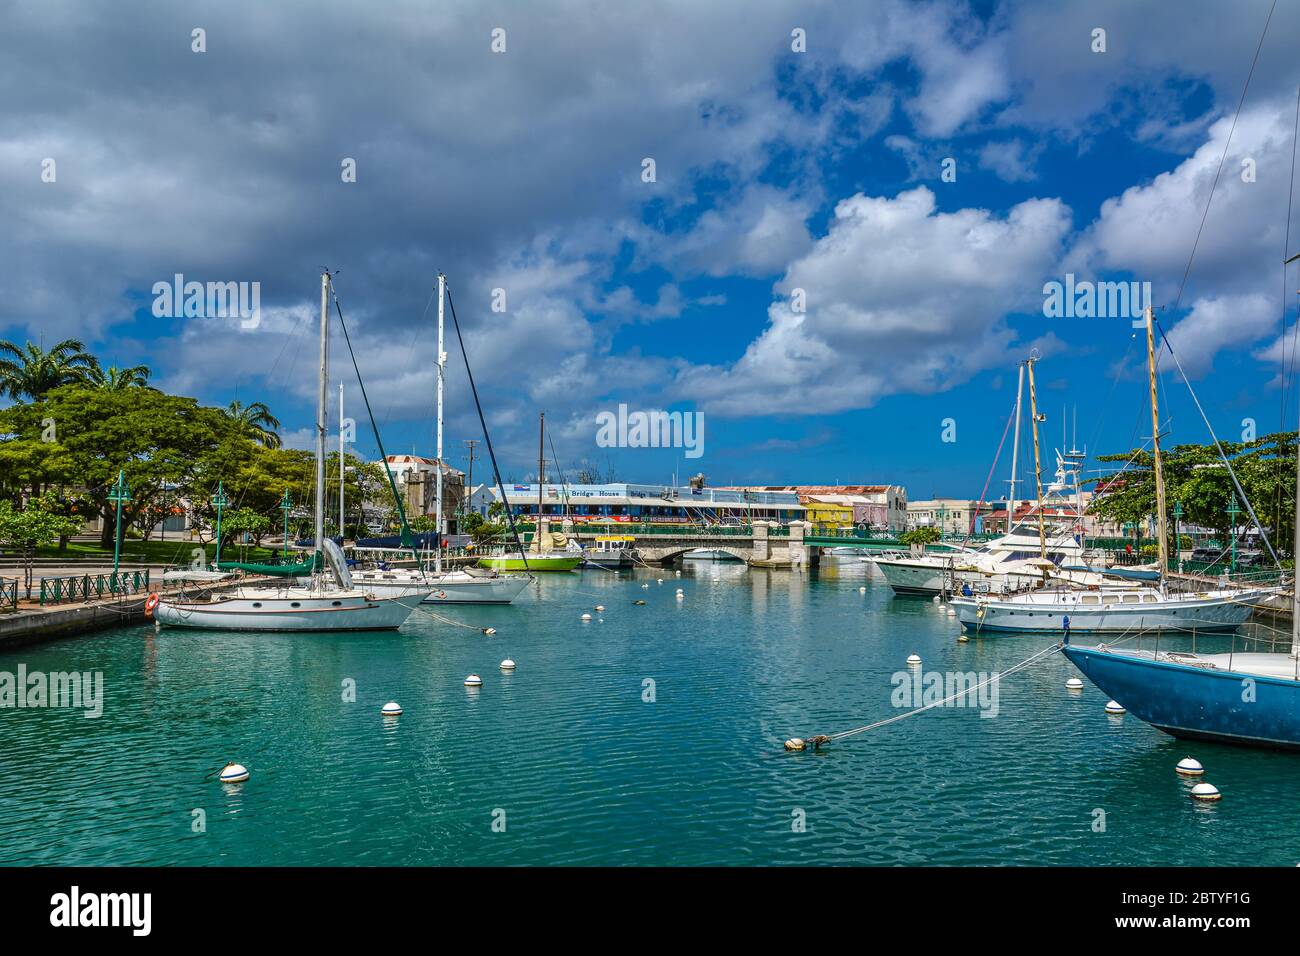 Bridgetown, Barbados, Caribbean - 22 Sept 2018: Sailing yachts moored in the downtown marina bay. White clouds in the blue sky. Copy space Stock Photo